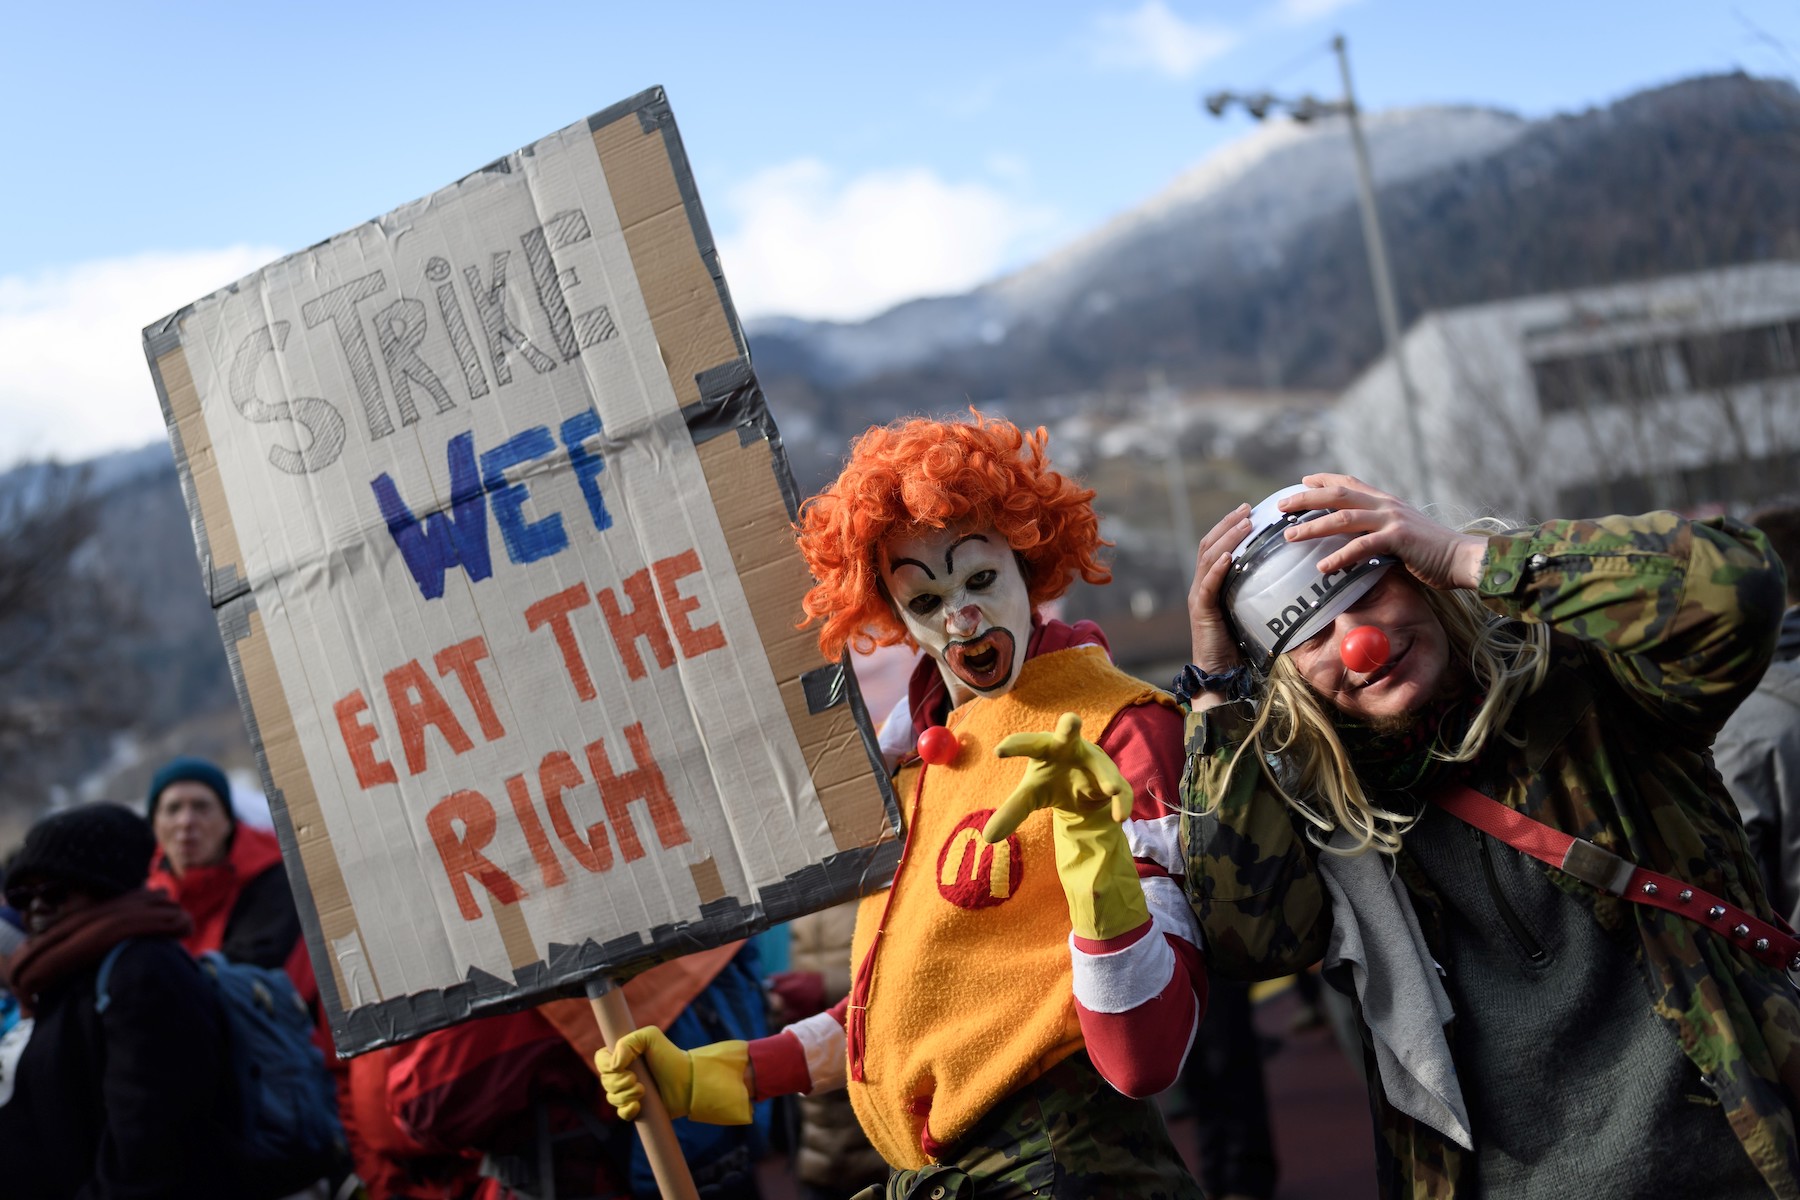 People In Switzerland Have Voted To Back Up Law To Cut Carbon Emissions